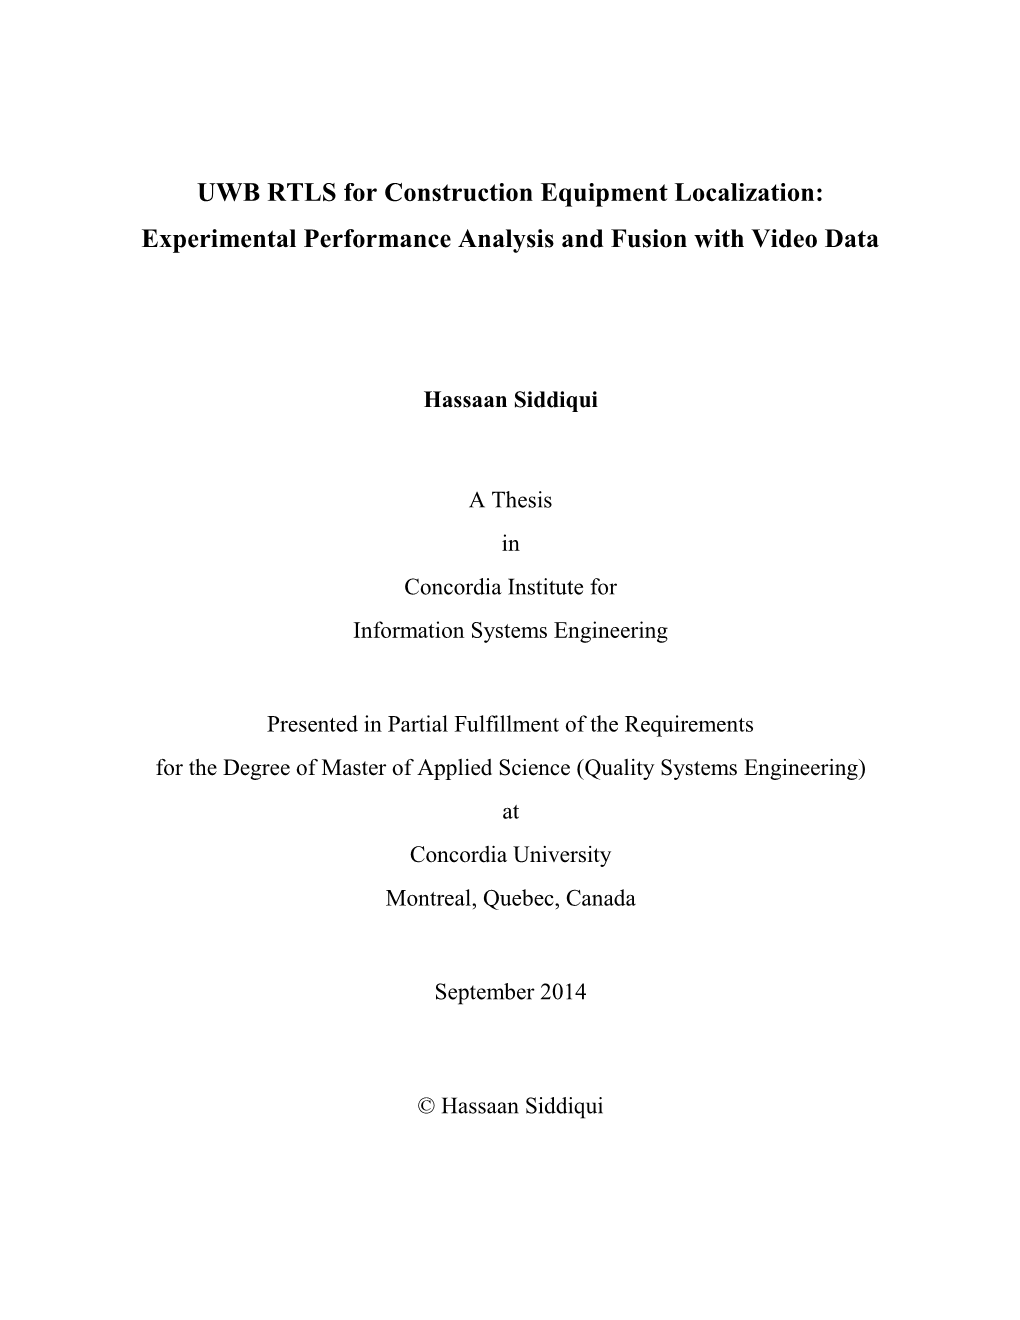 UWB RTLS for Construction Equipment Localization: Experimental Performance Analysis and Fusion with Video Data